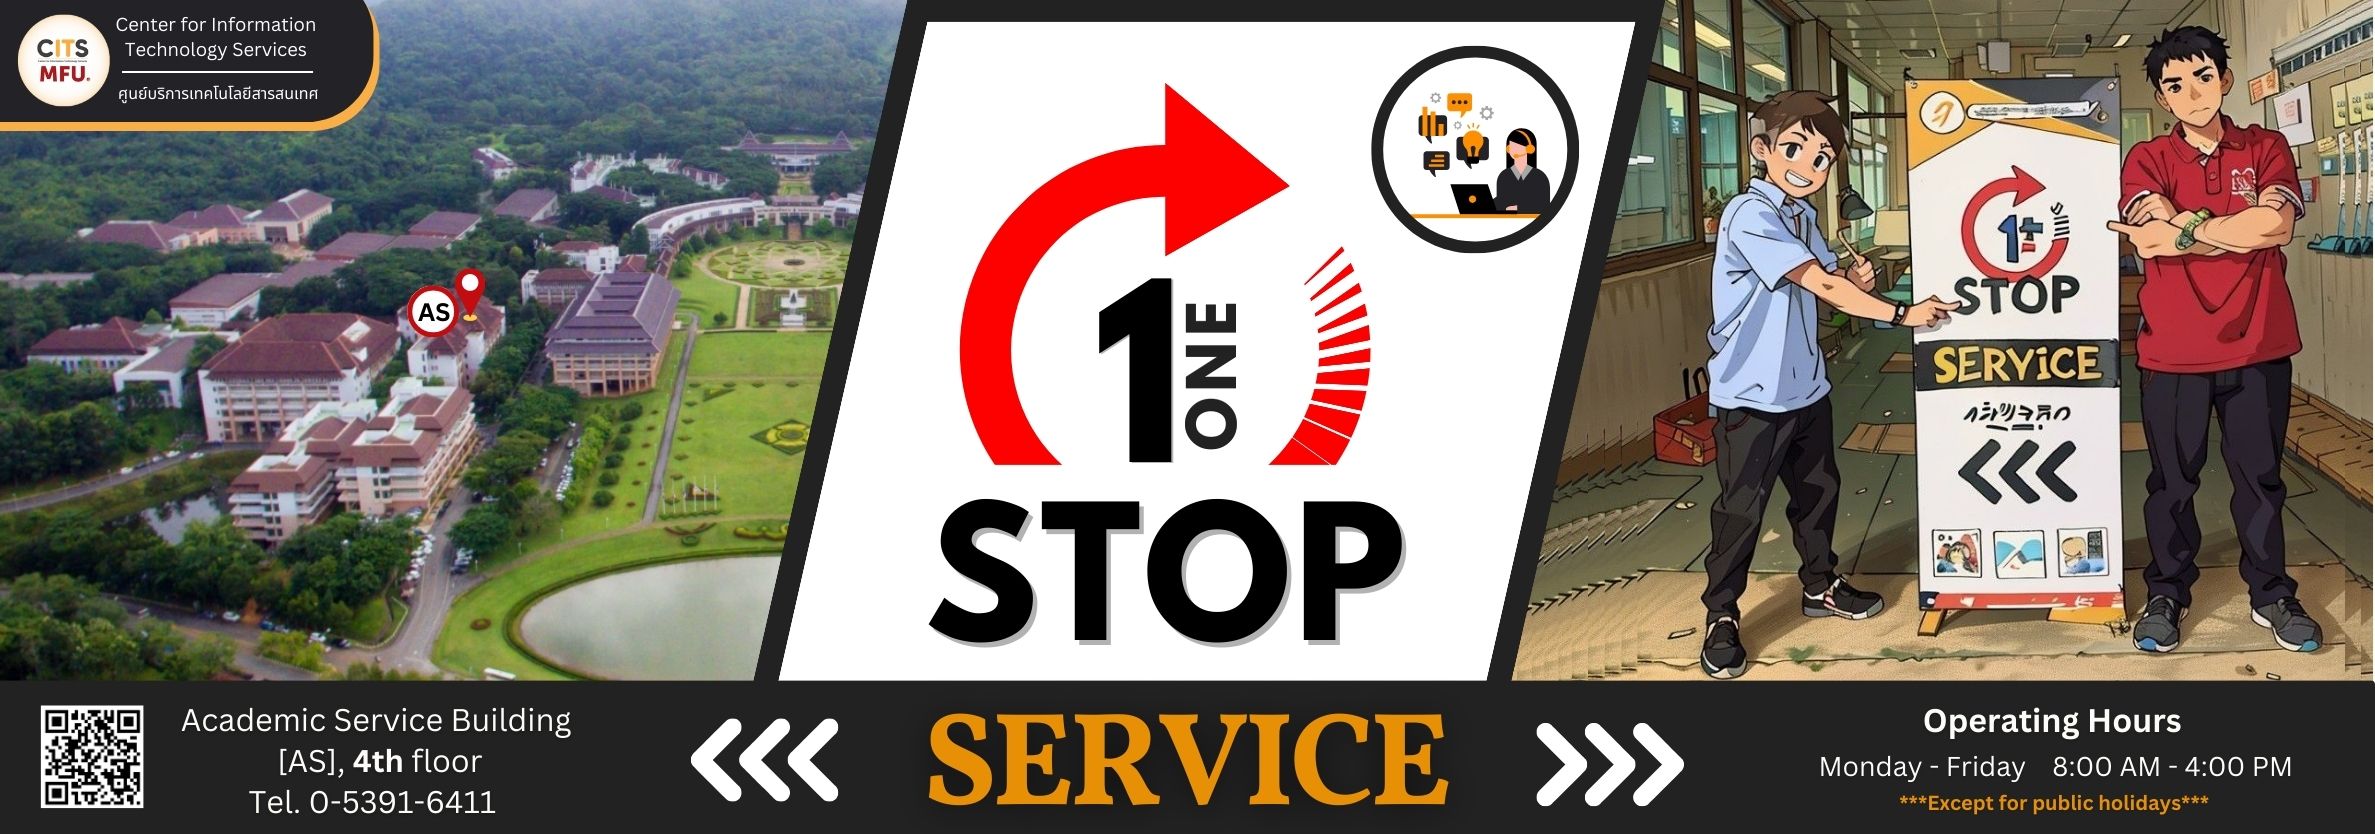 CITS one stop service